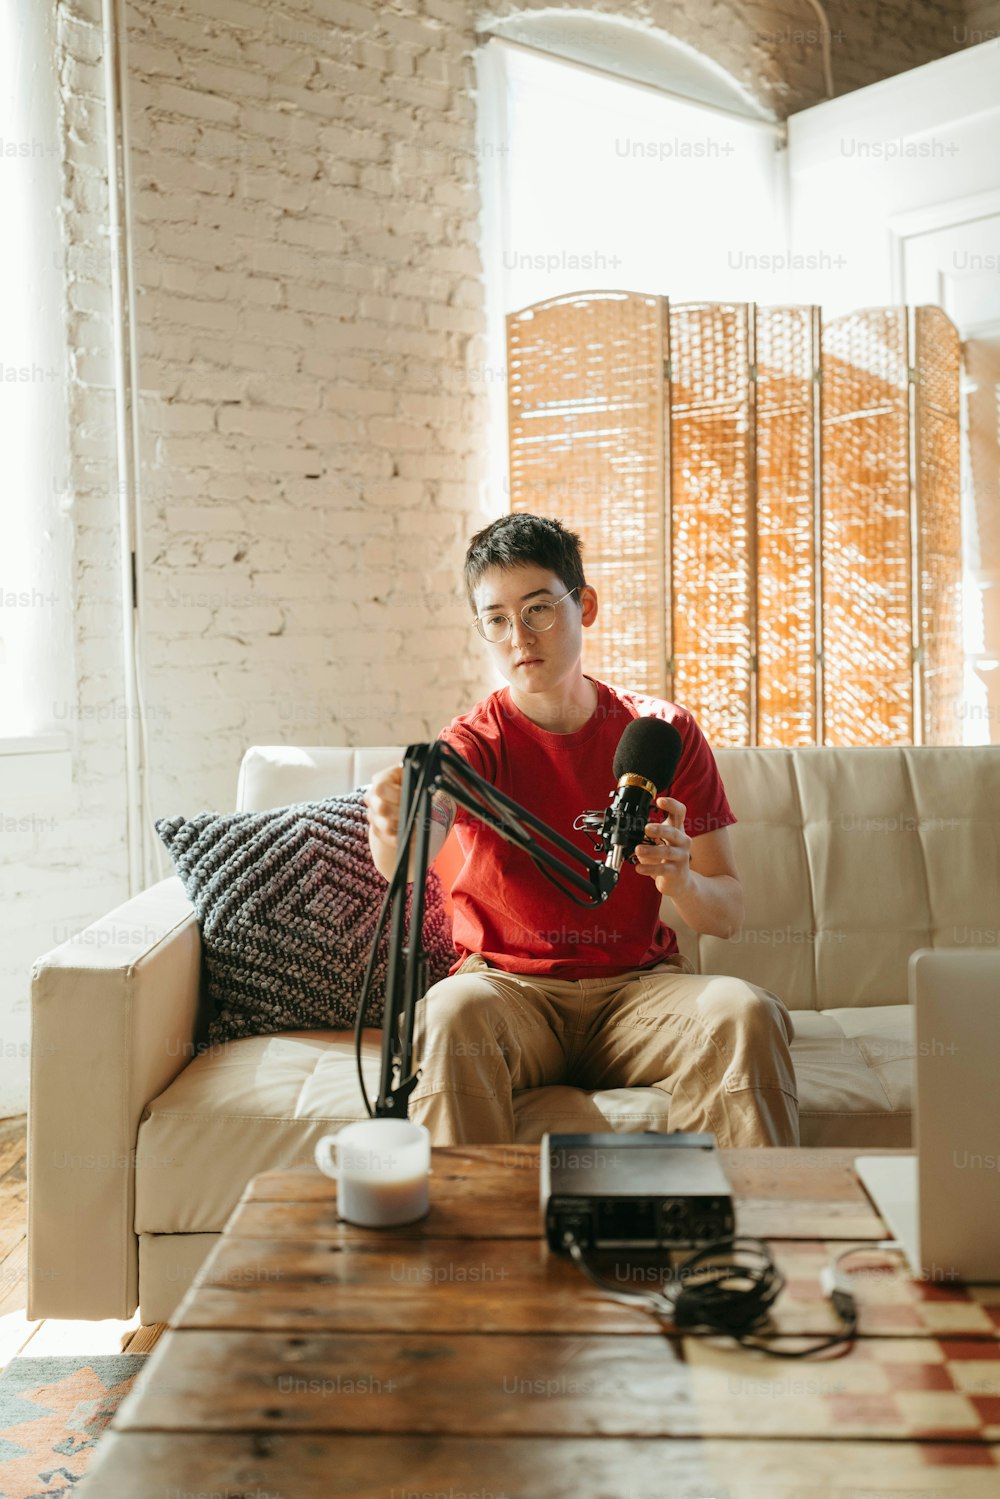 a man sitting on a couch holding a camera